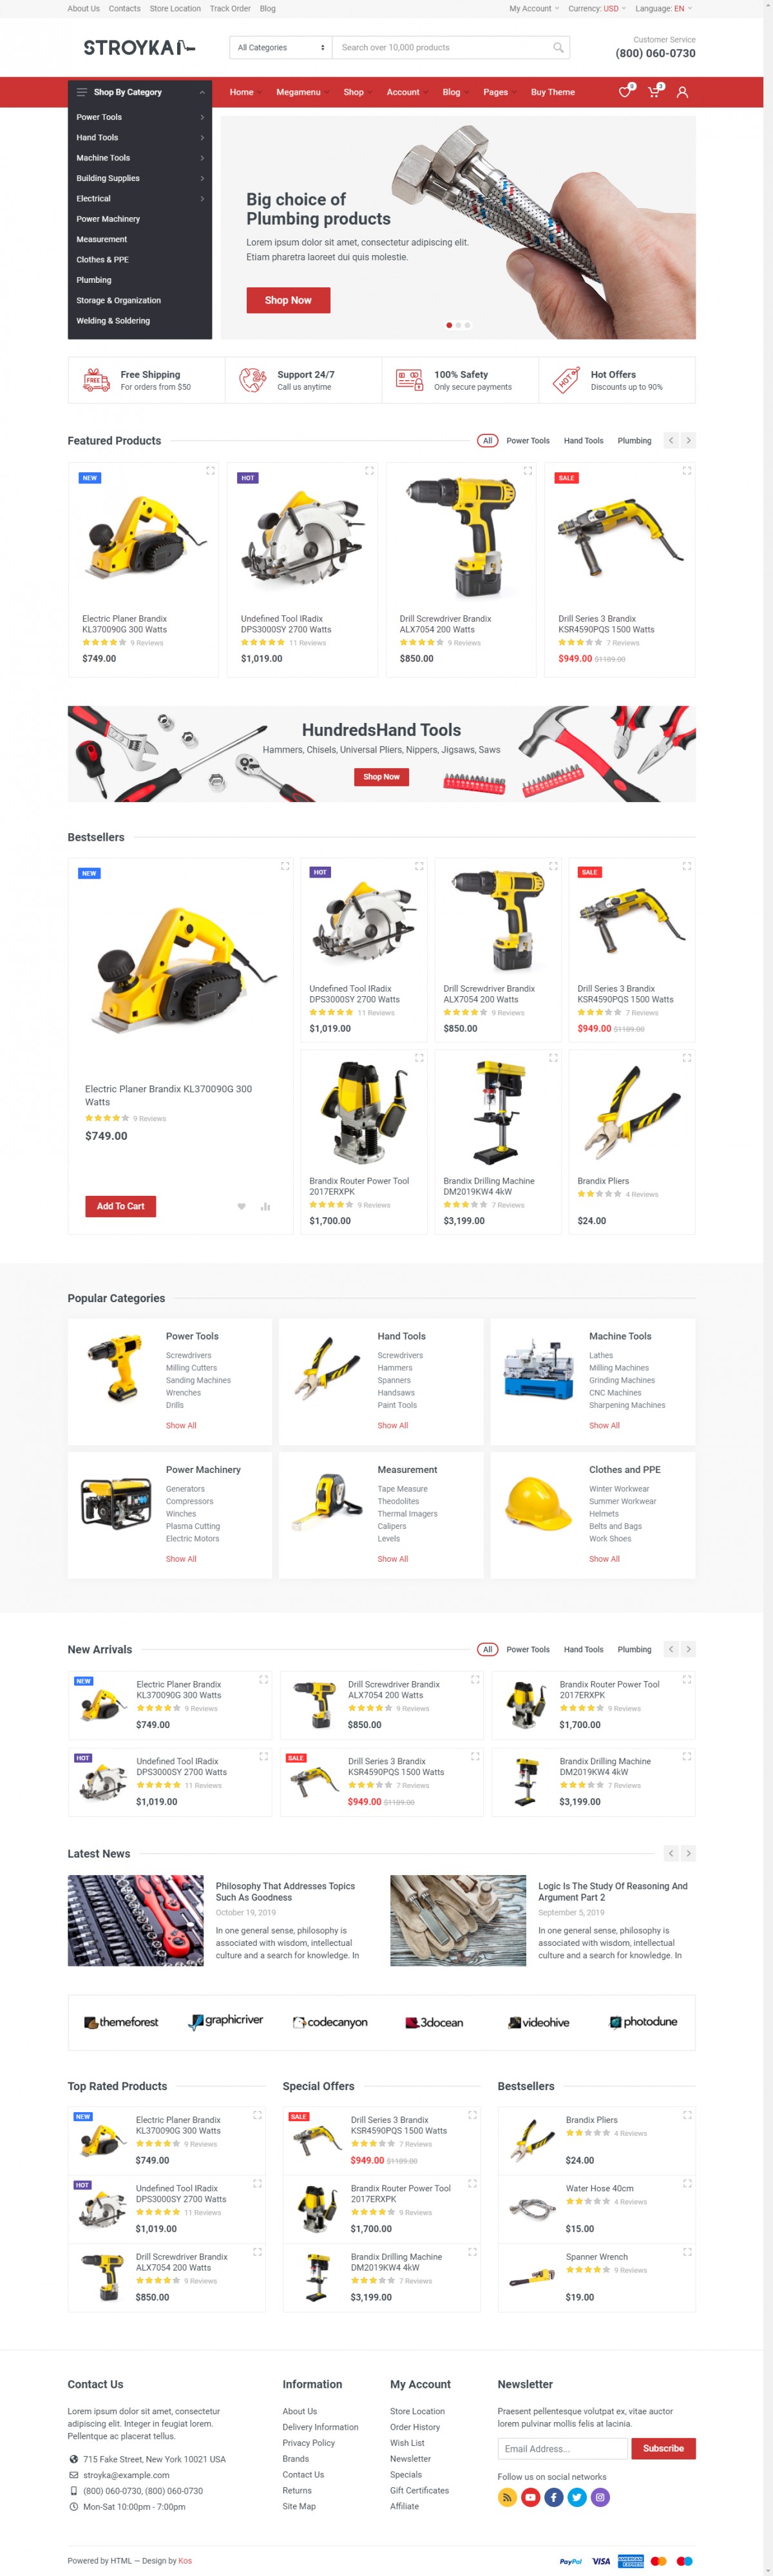 Stroyka - Tools Store HTML Template